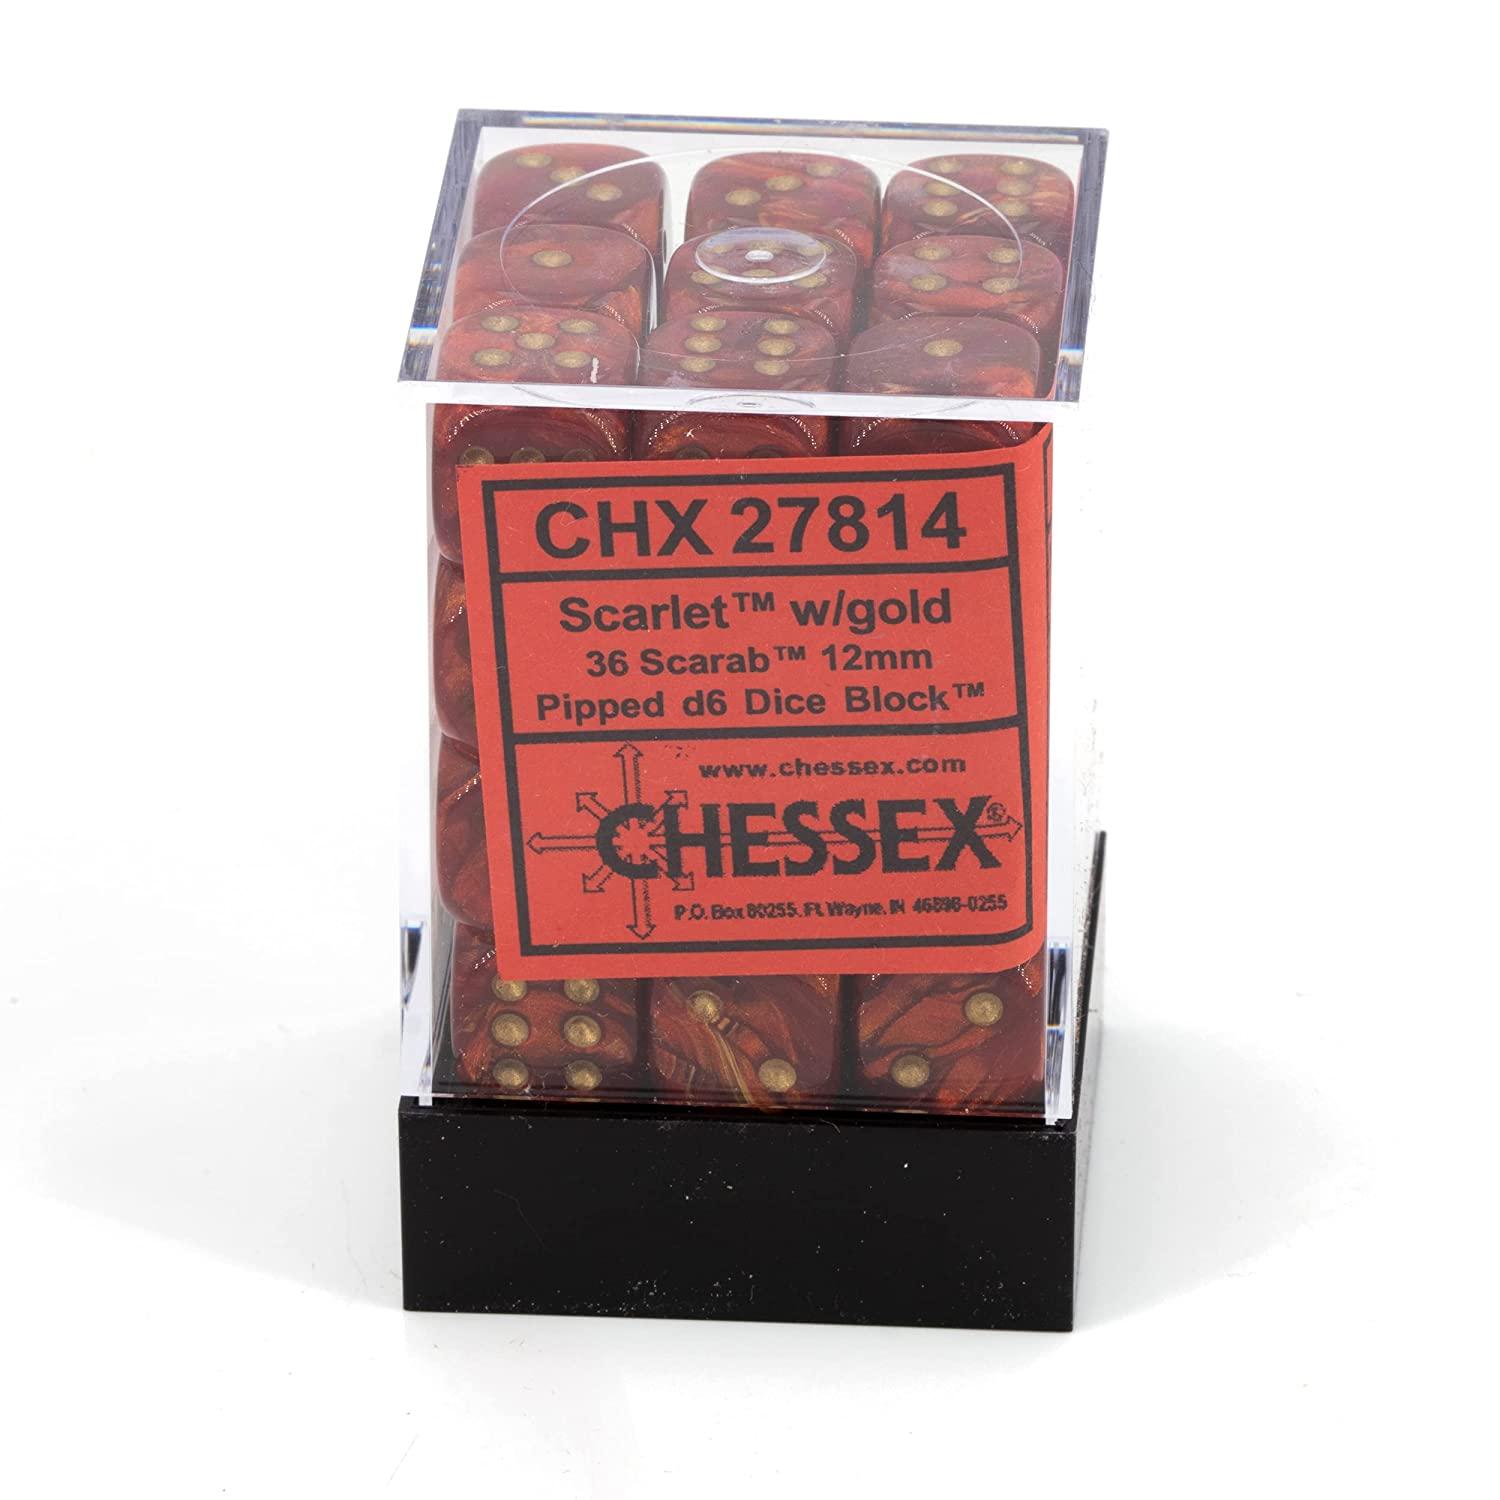 Chessex Dice d6 Sets: Scarab Scarlet with Gold - 12mm Six Sided